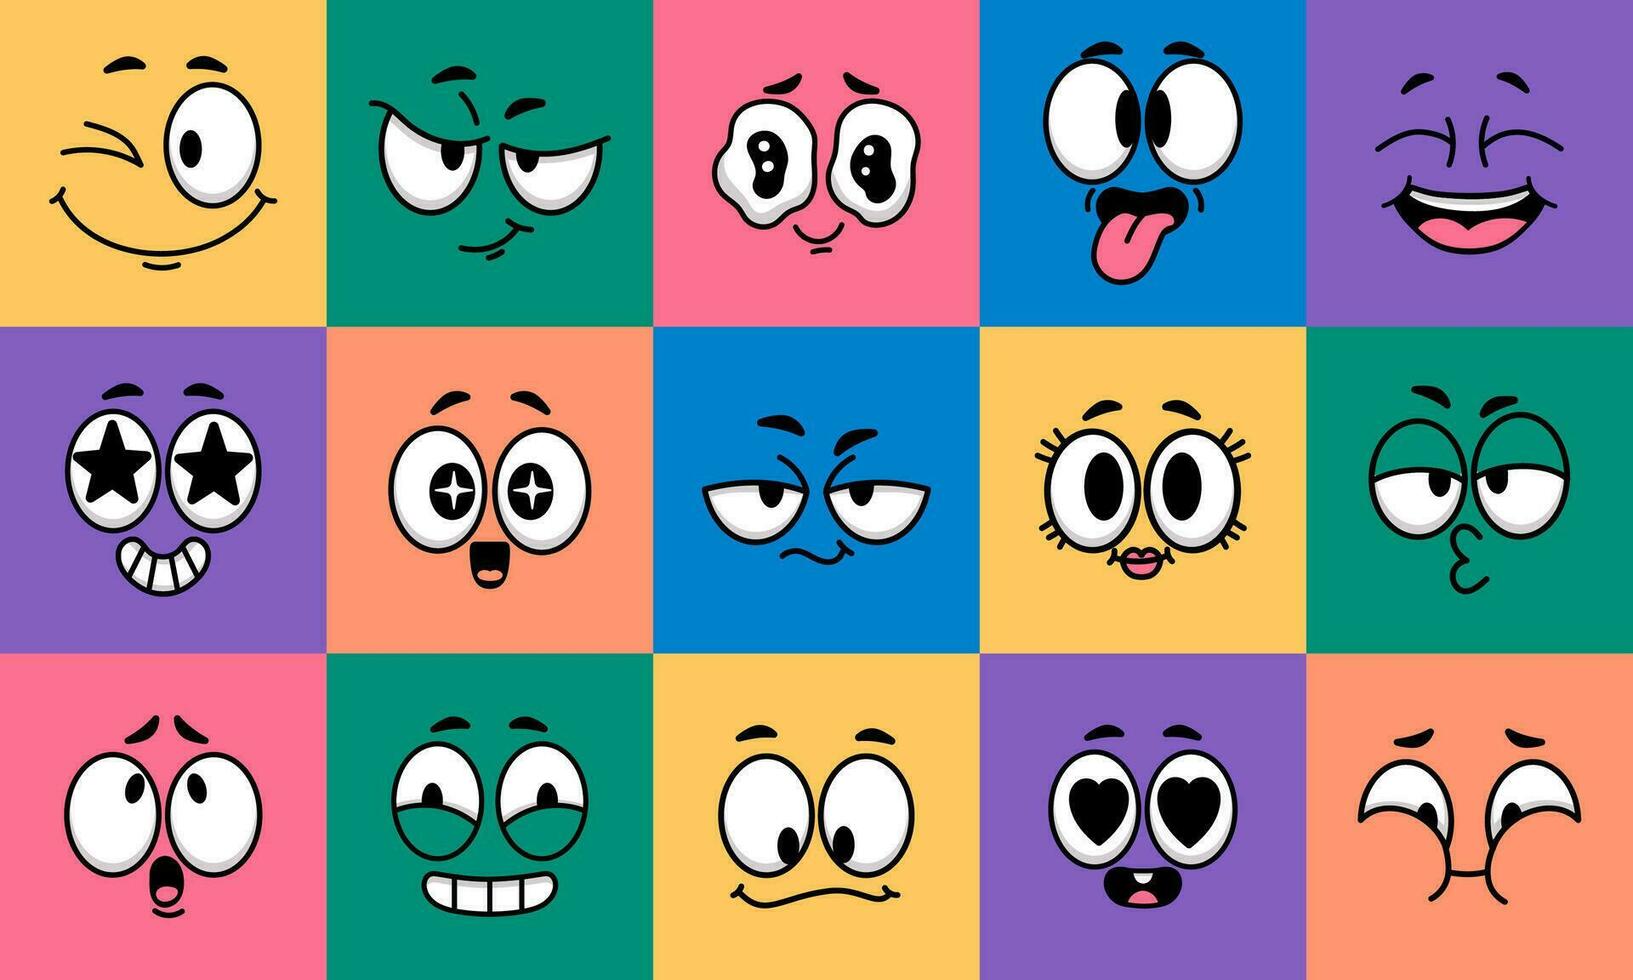 Cartoon face expression. Emotion comic face character on colors. Funny avatars with eyes and mouth. Caricature facial laugh, kiss, love mood. Vector illustration